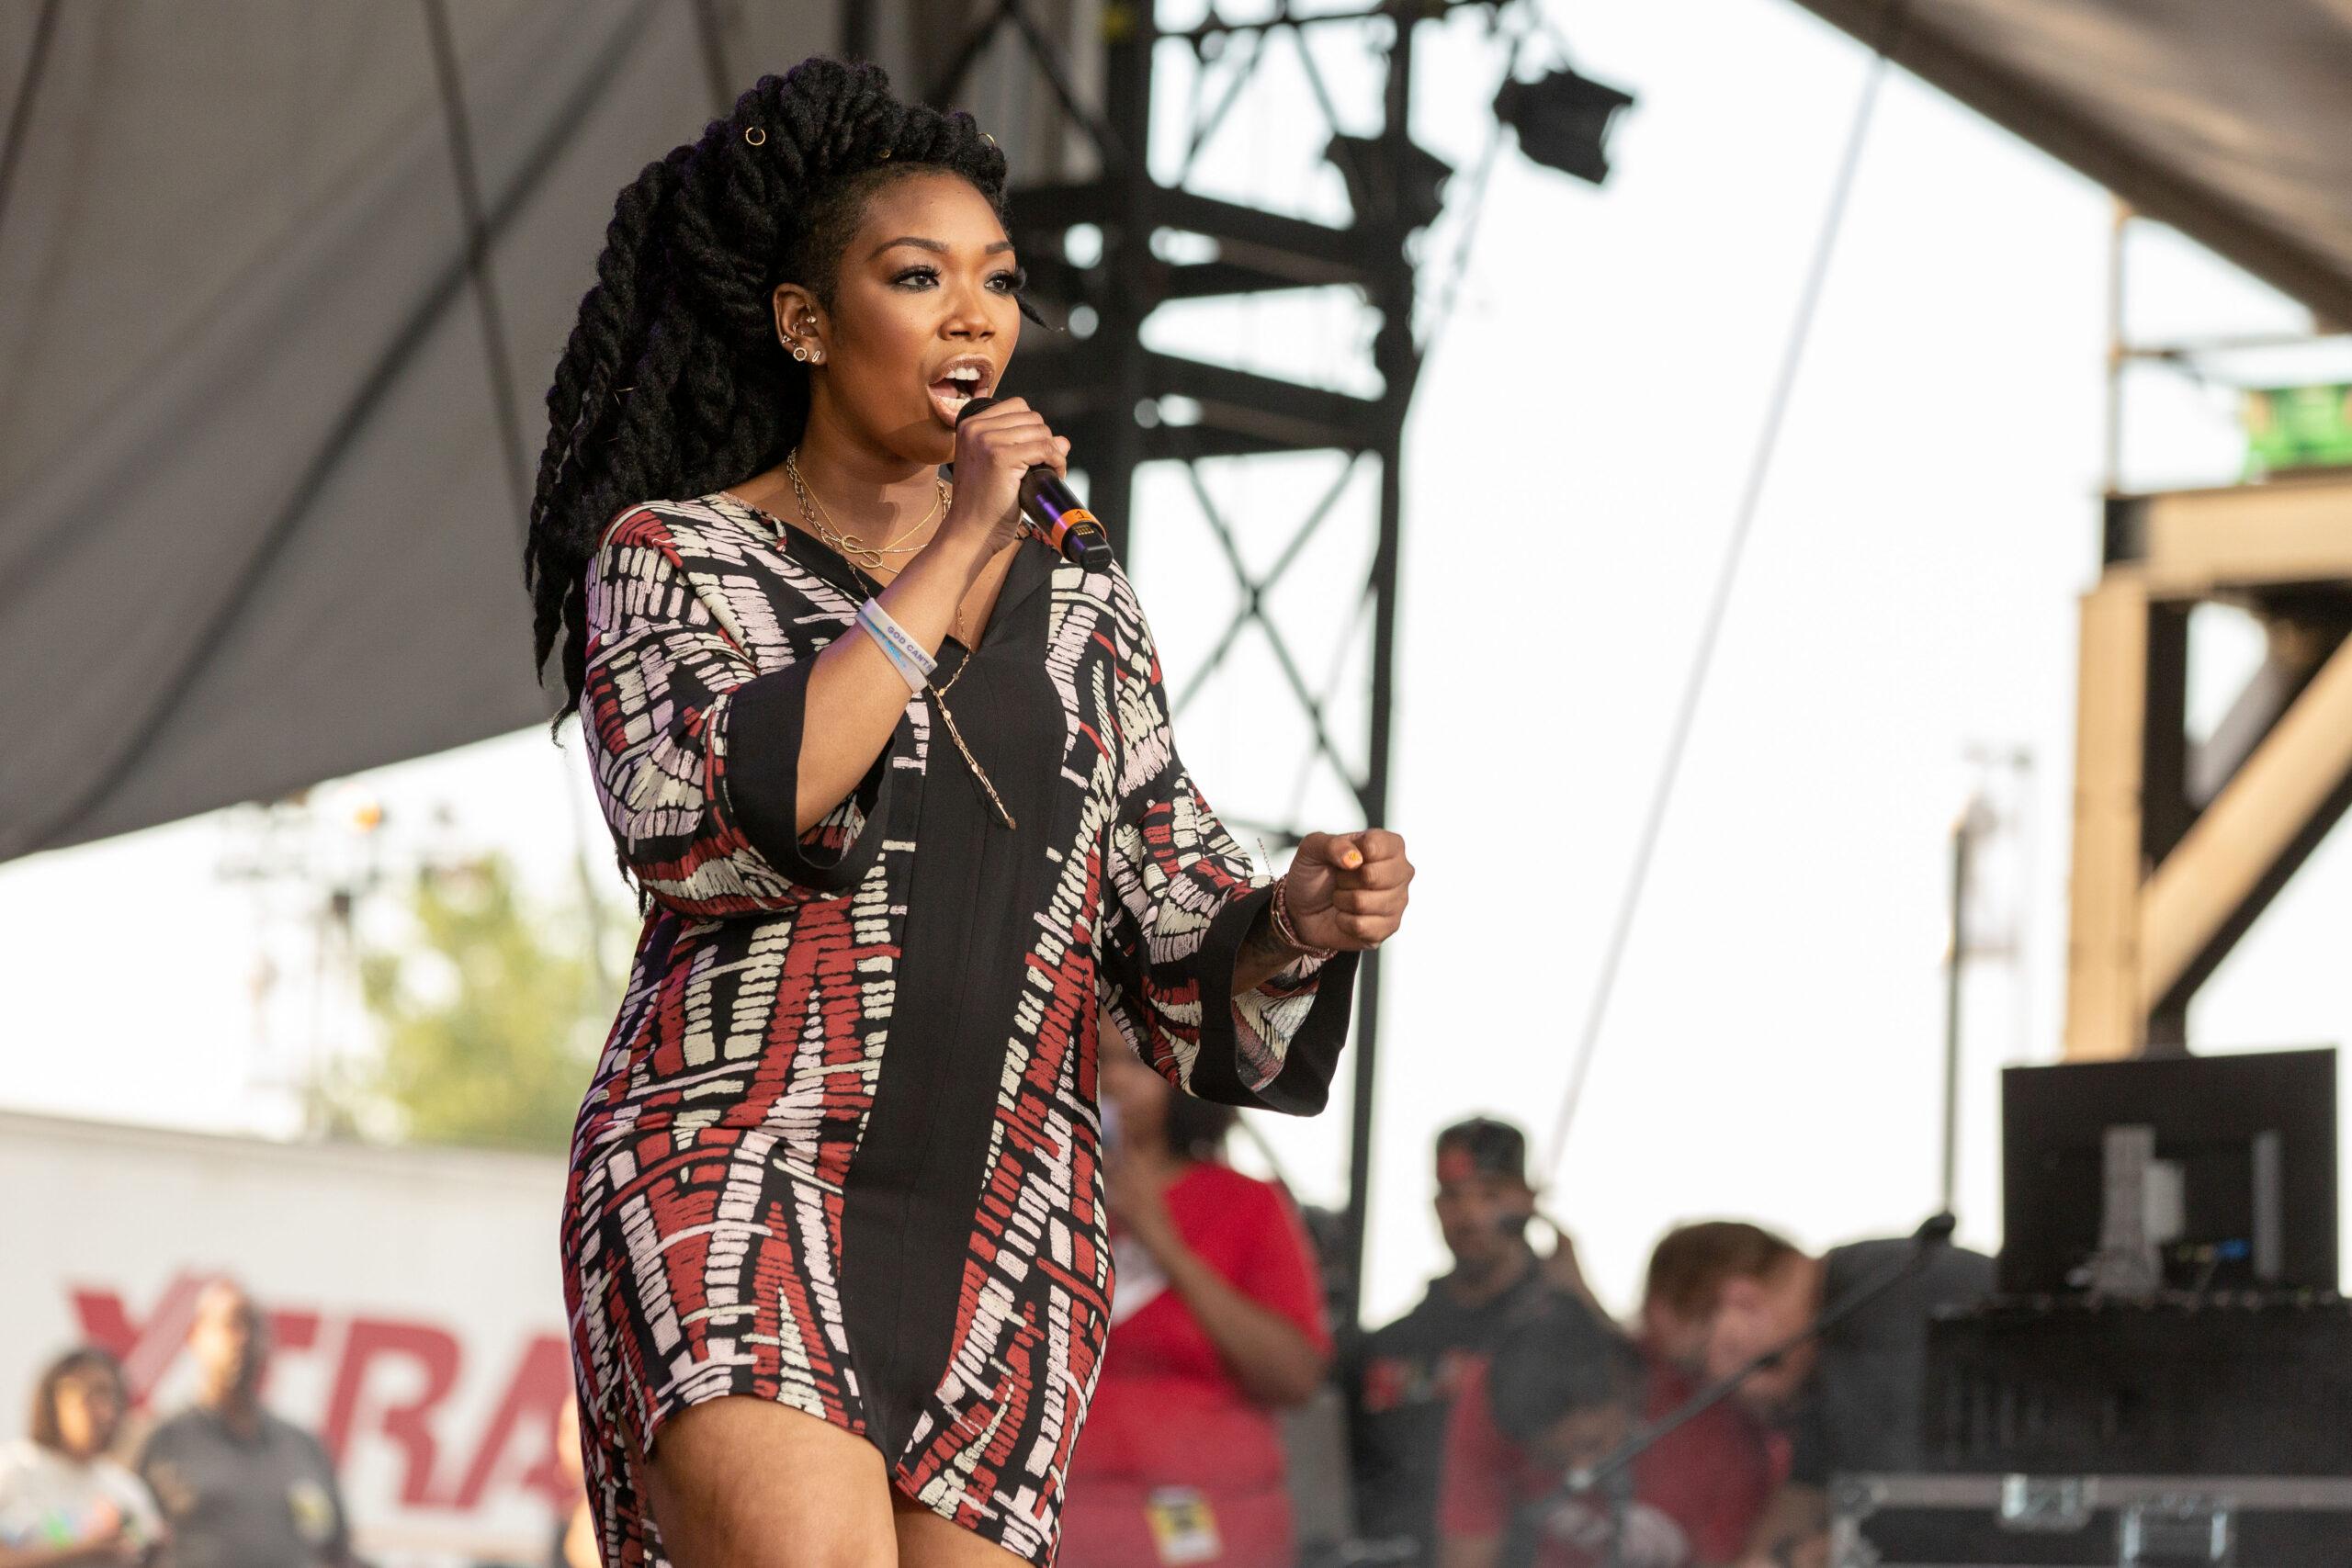 Singer Brandy Accused Of 'Age Discrimination' After Firing 60-Year-Old Housekeeper